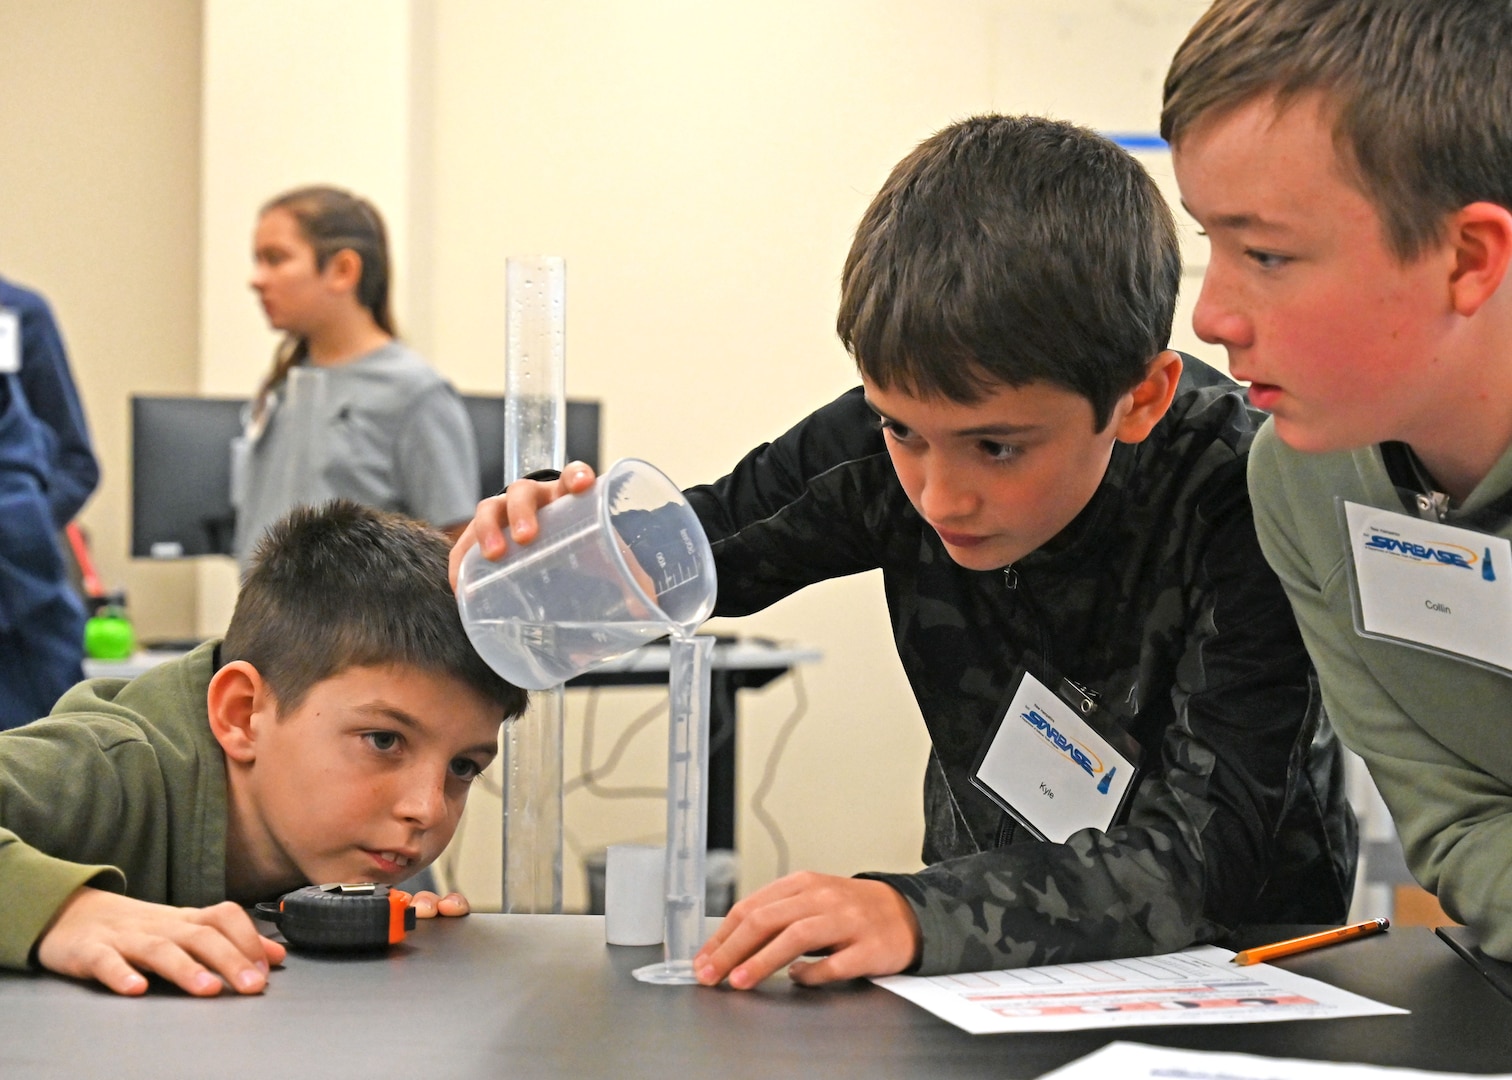 From left, Jaxson Mailhot, Kyle Tassias, and Collin Meaney of Dunbarton Elementary School conduct a science experiment Nov. 13, 2023, at the New Hampshire National Guard’s Edward Cross Training Complex in Pembroke.